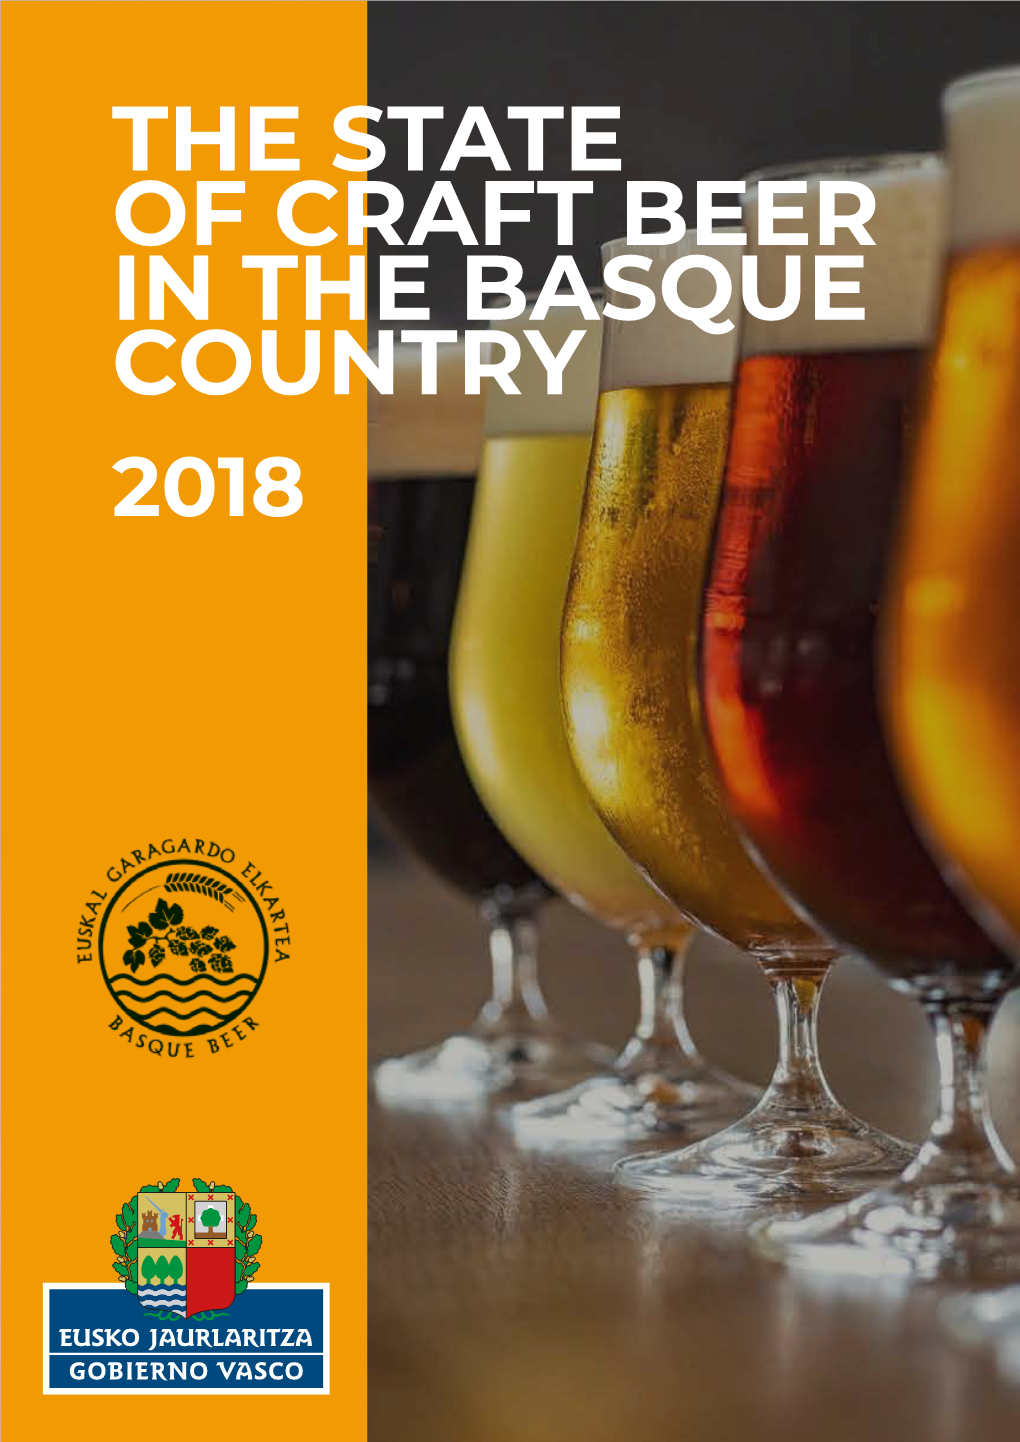 The State of Craft Beer in the Basque Country 2018 the State of Craft Beer in Basque Country 2018 Introduction